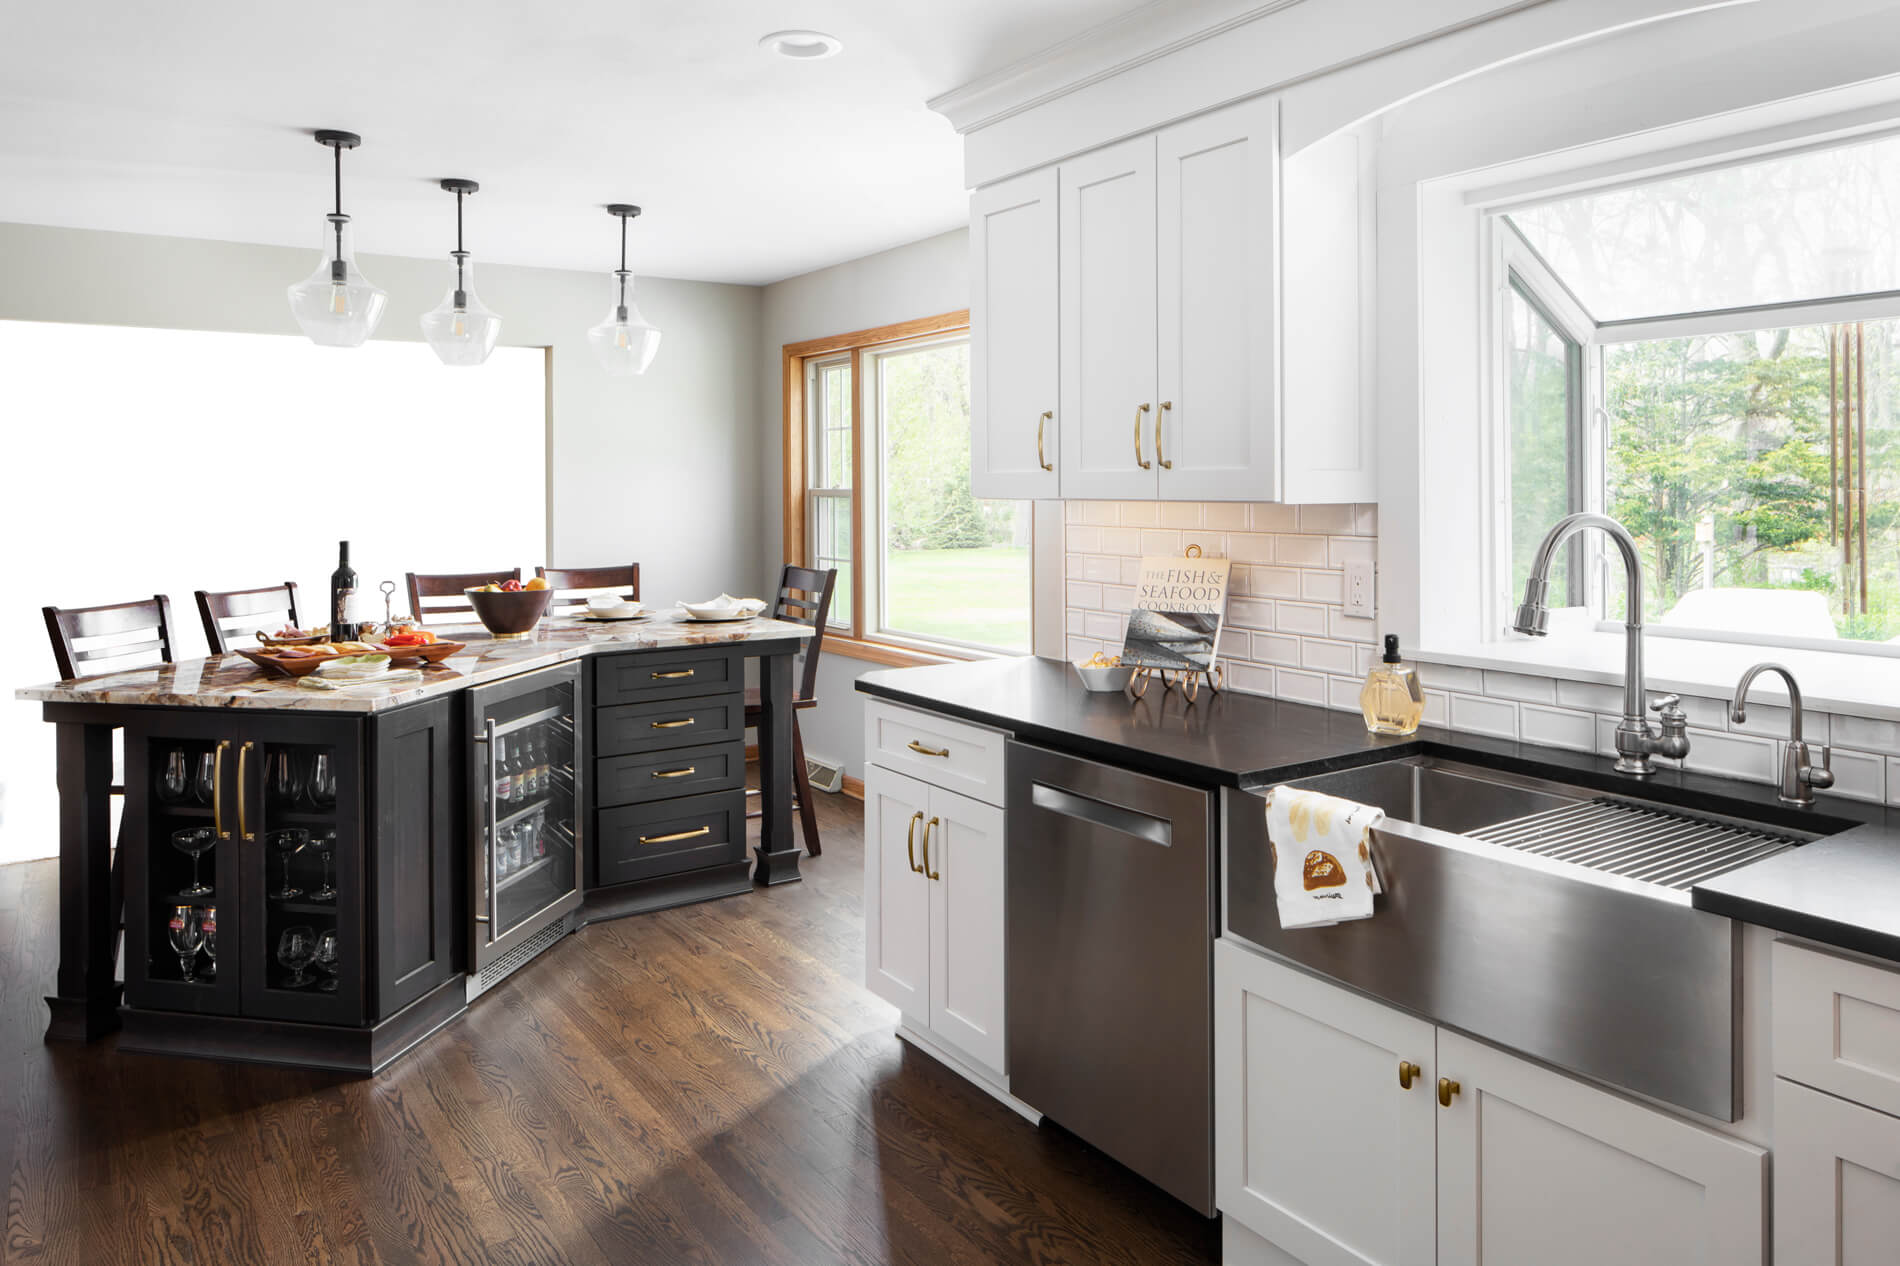 A black, white, and gold kitchen with an angled kitchen island.